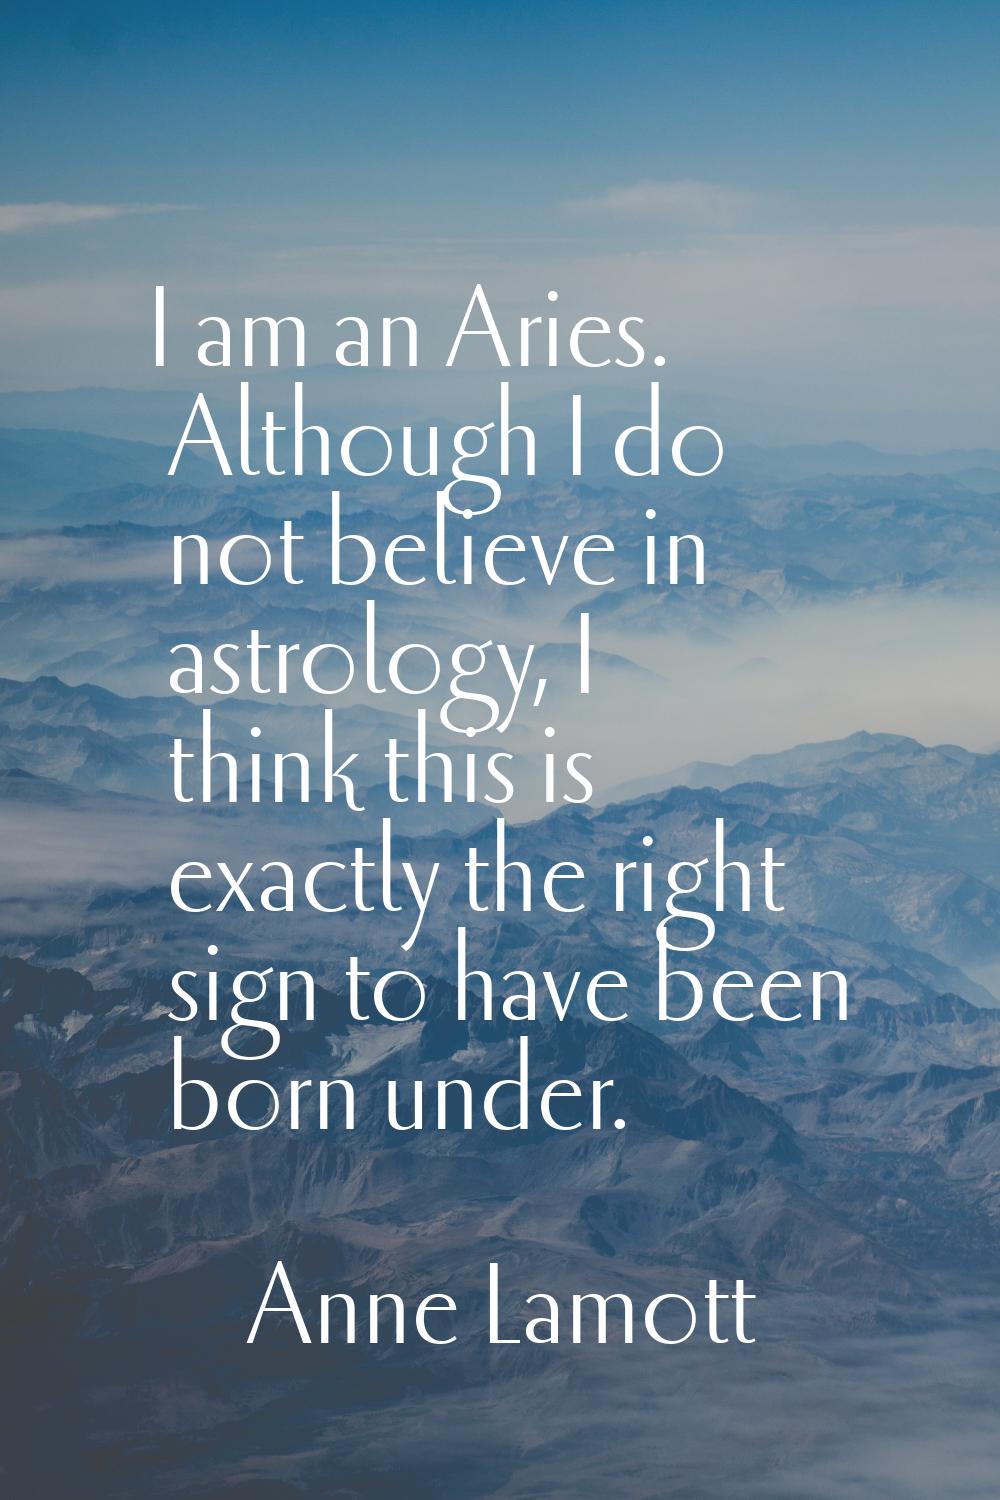 I am an Aries. Although I do not believe in astrology, I think this is exactly the right sign to ha